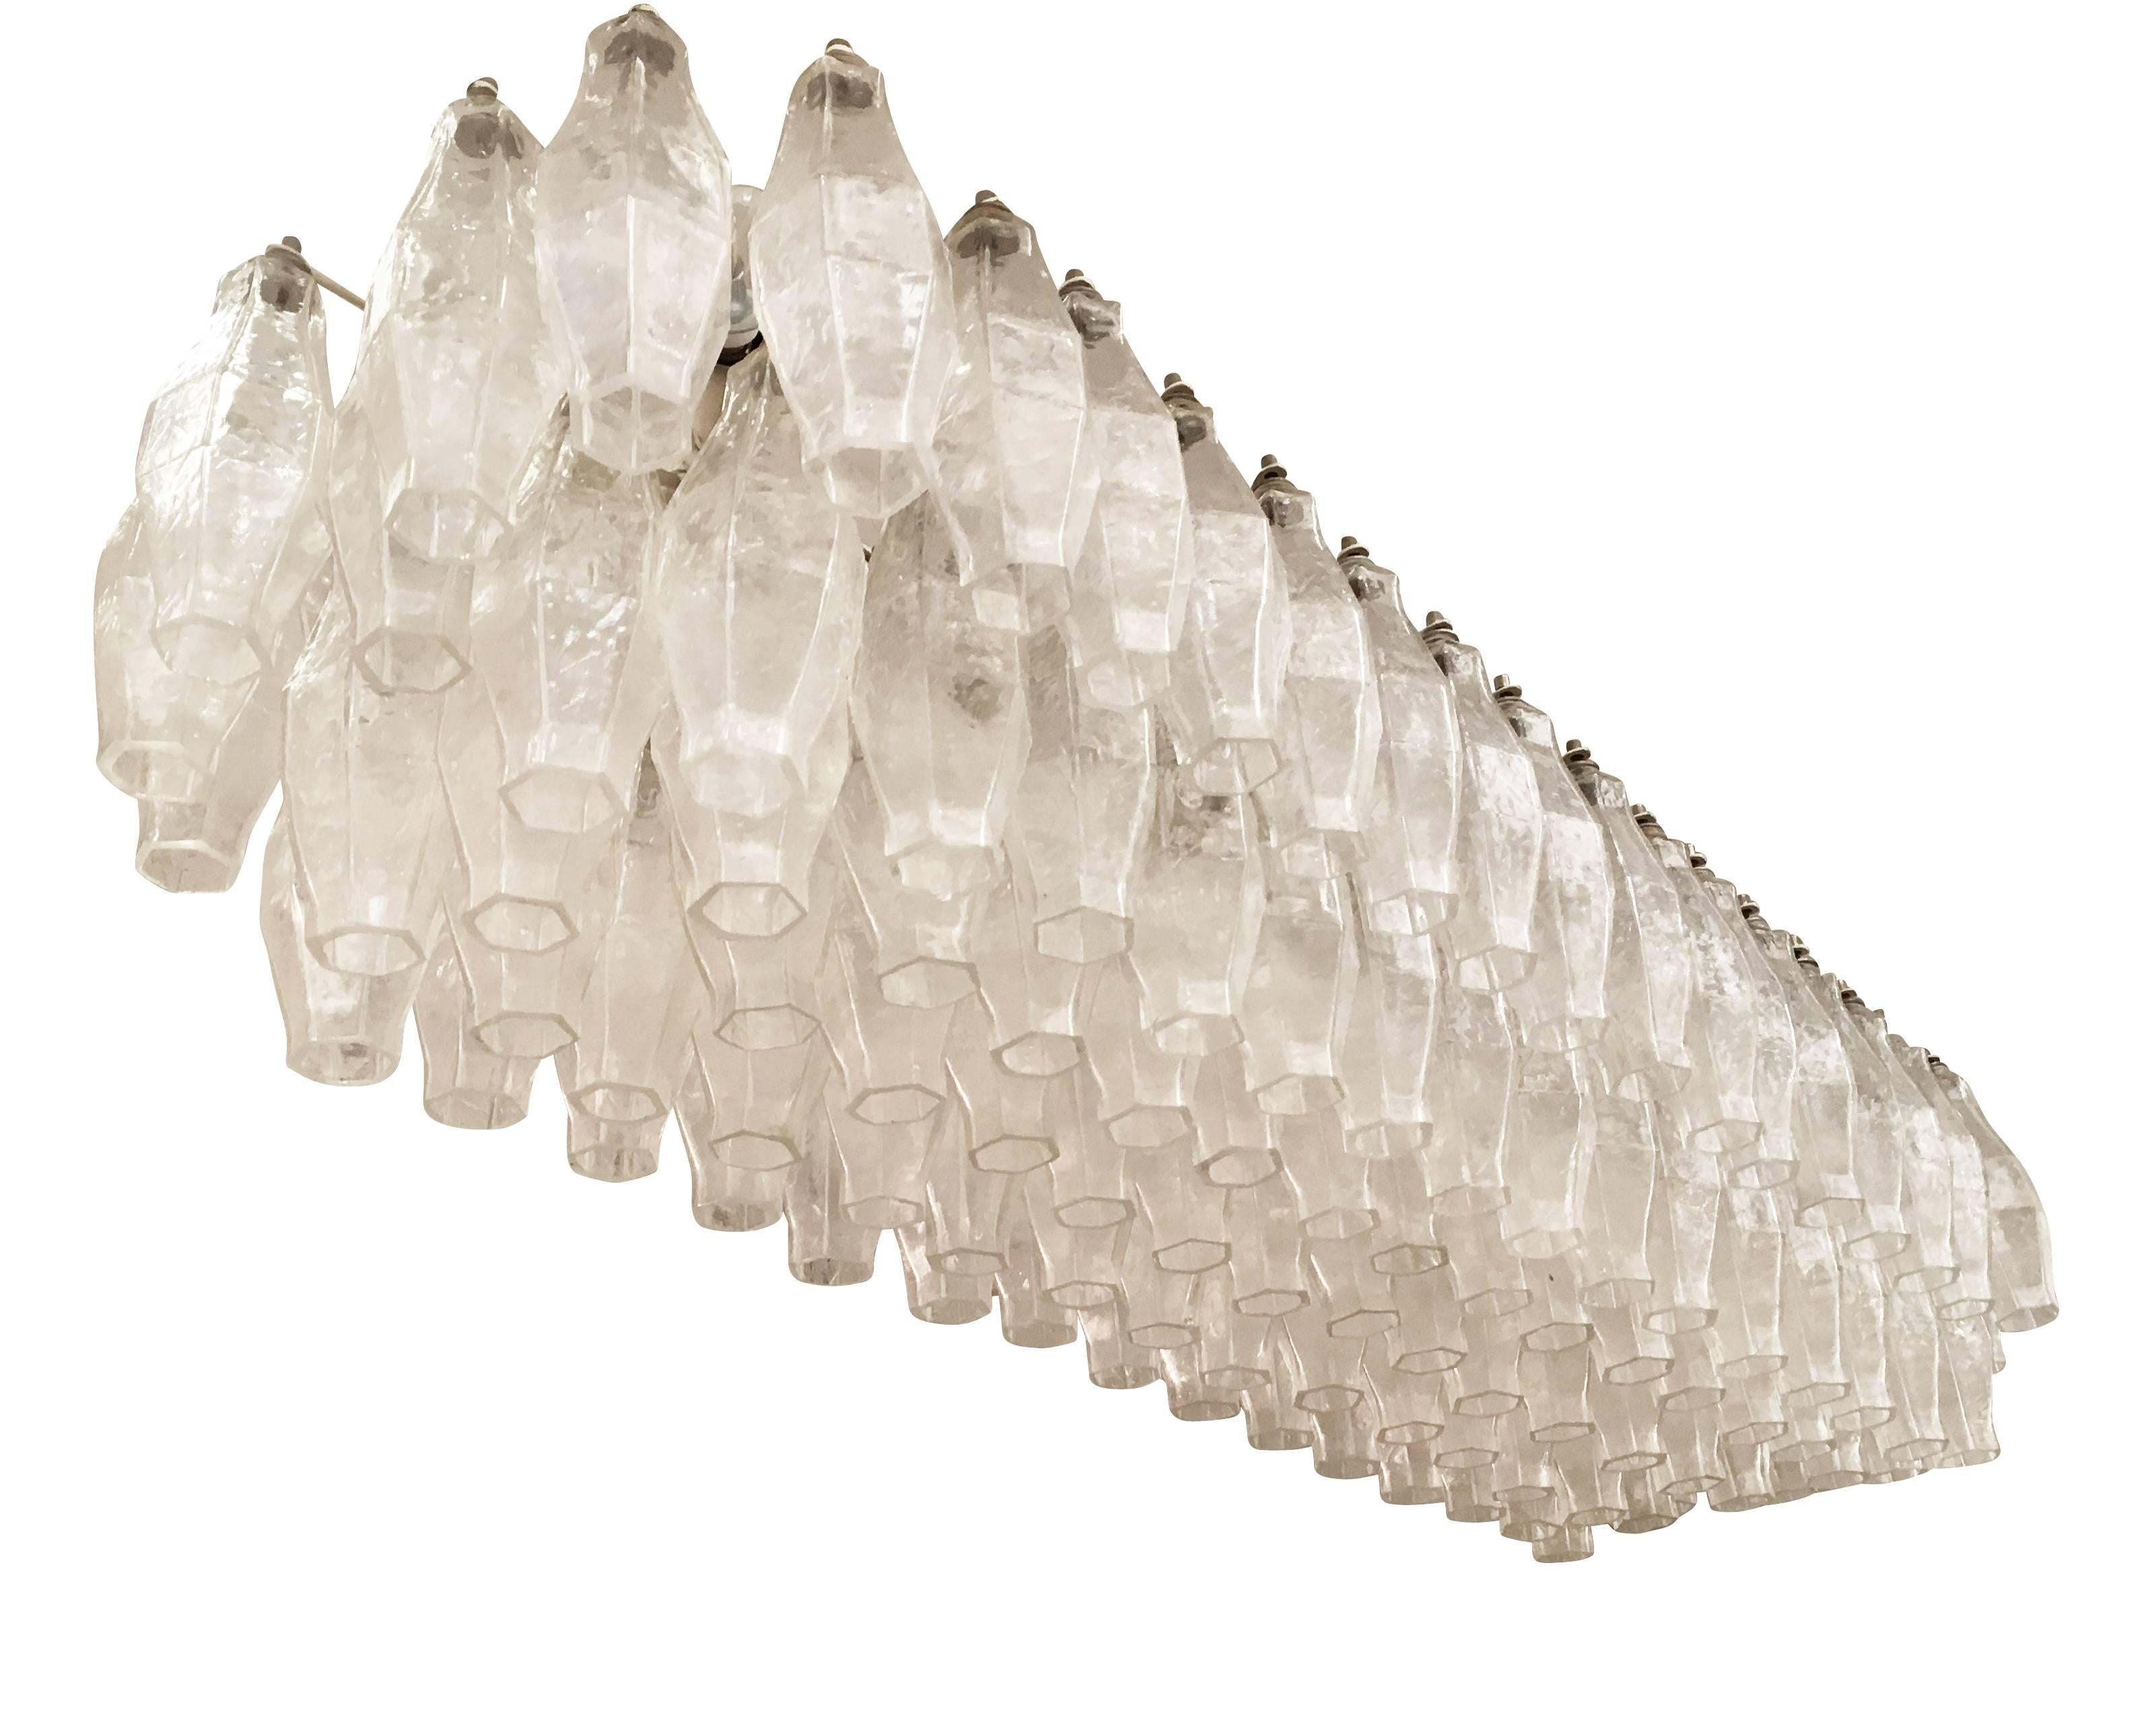 Stunning elongated chandelier attributed to Venini featuring 119 clear polyhedral glasses. The white frame holds 12 candelabra sockets. Ideal over a dining room table or a long hallway. Can be hung from two chains or stems.

Condition: Excellent